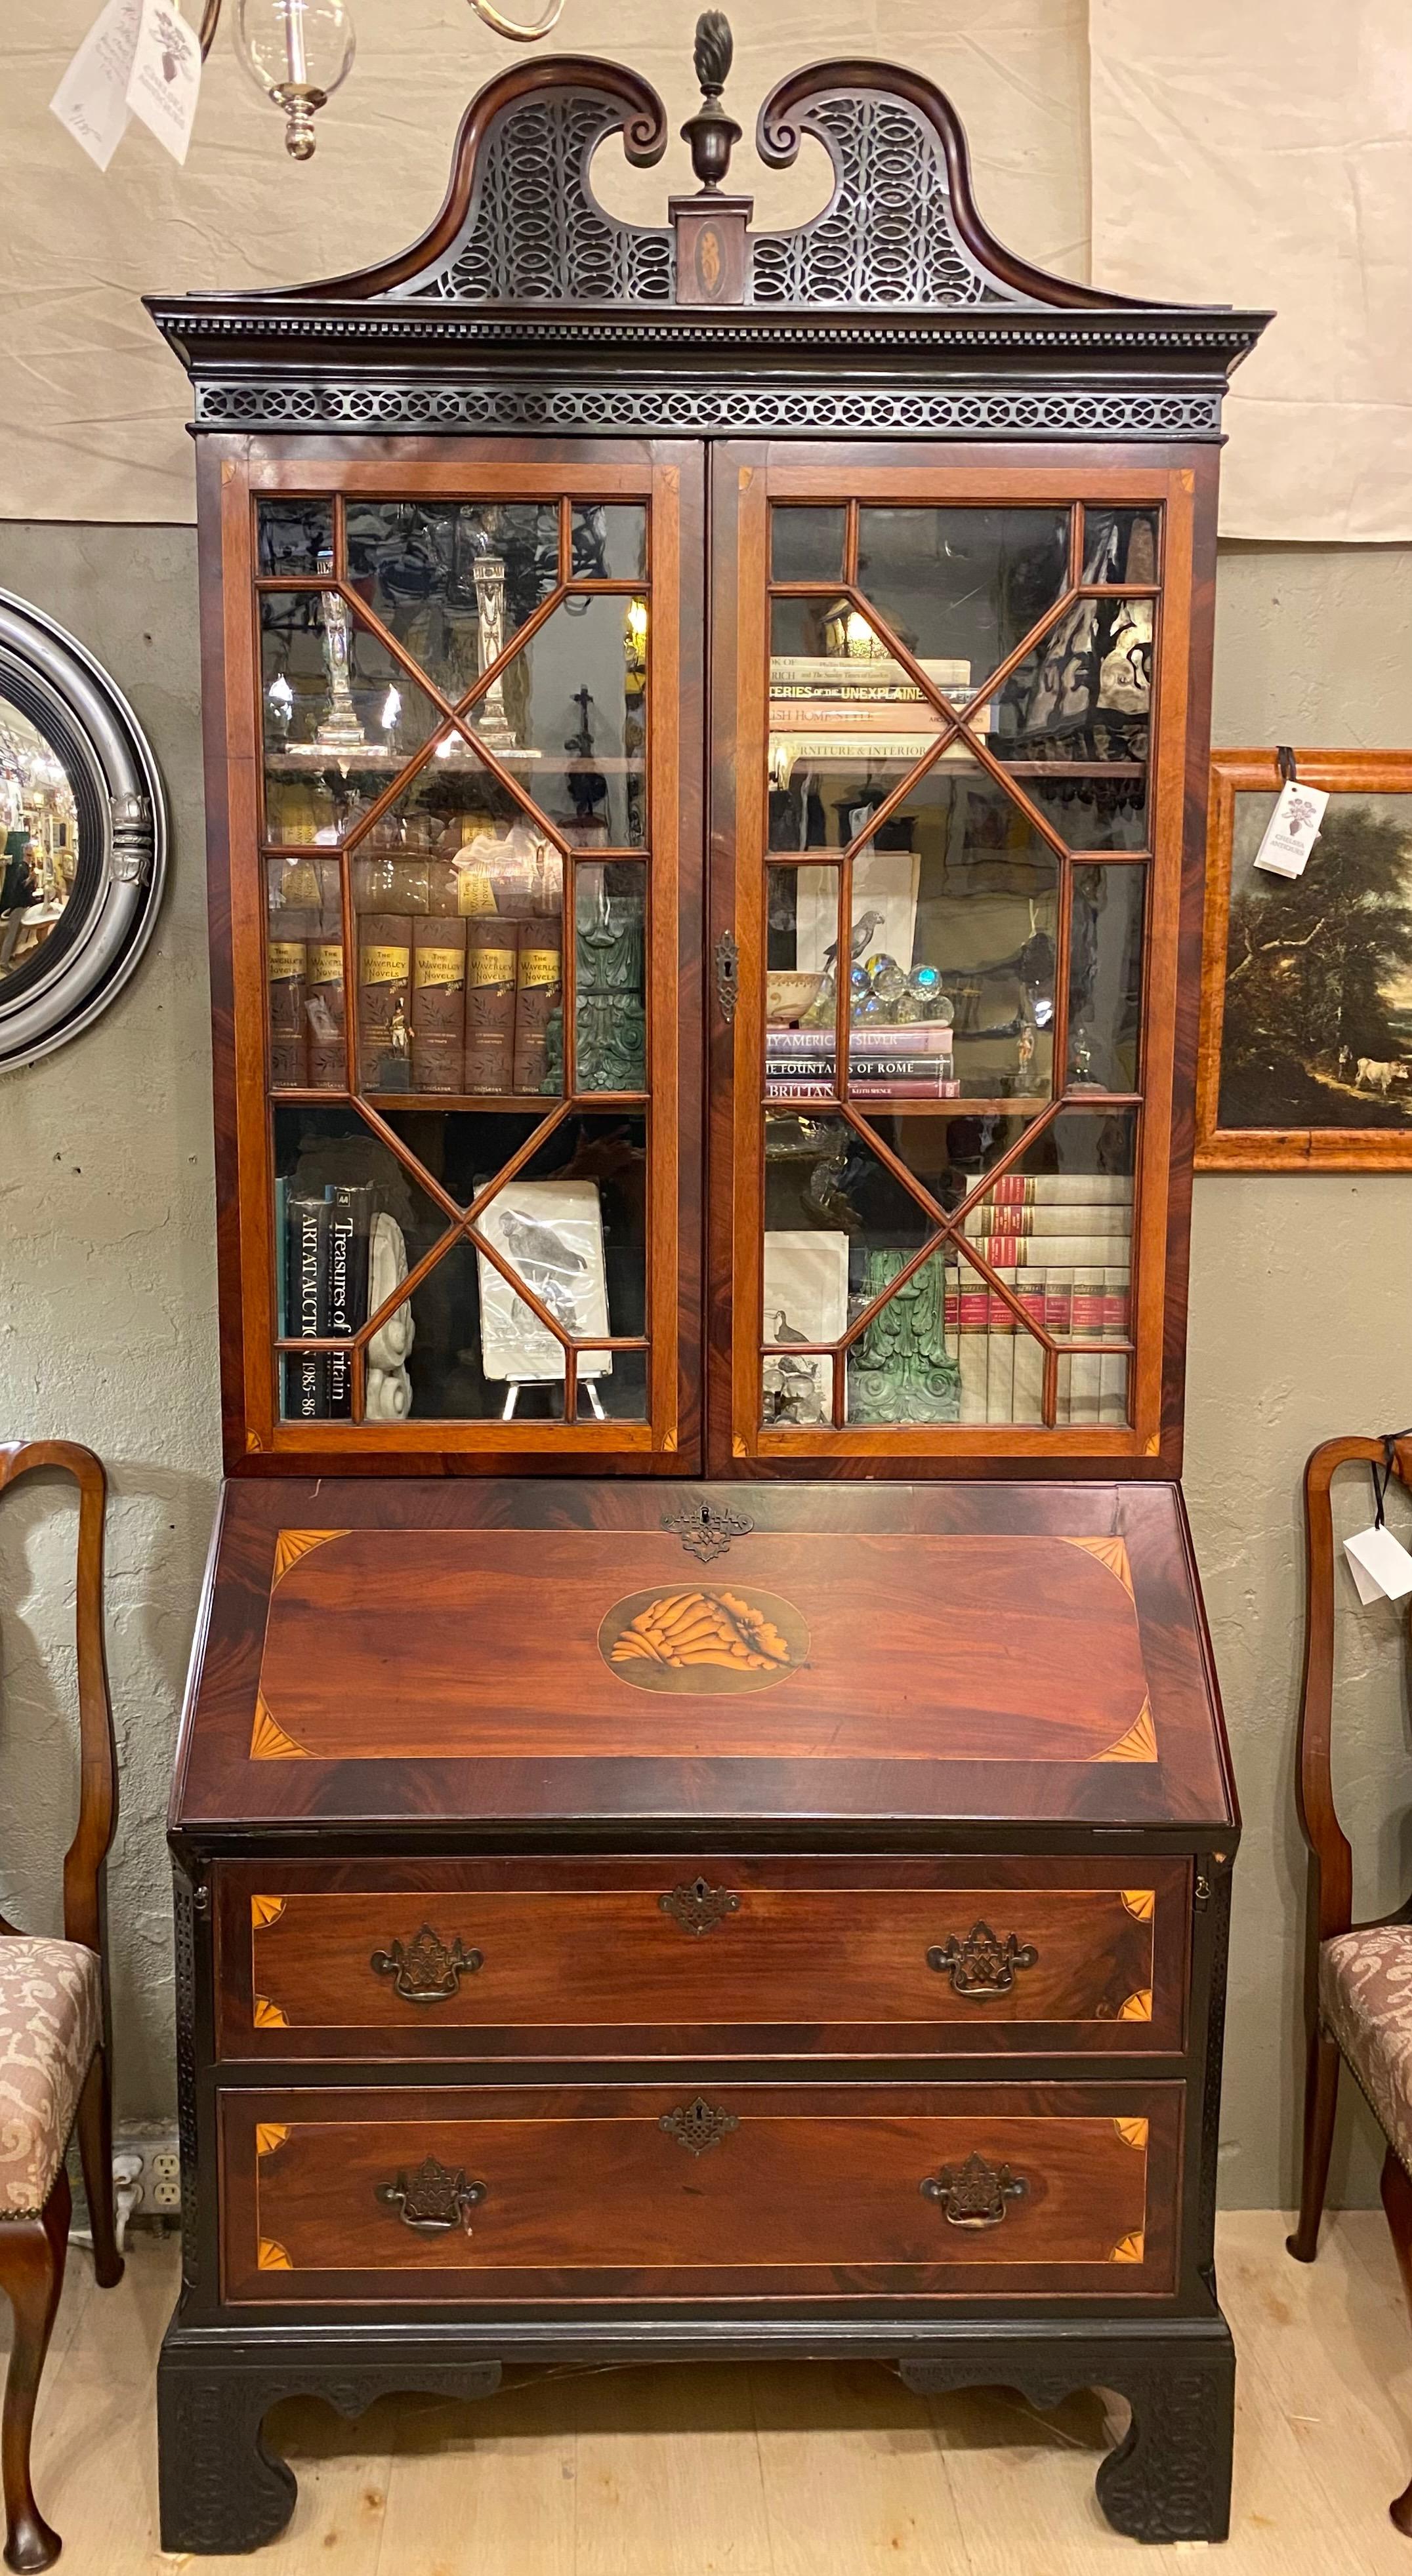 An eccentric and highly unusual Classic Sheraton style mahogany and satinwood inlay slant front secretary with Chinese Chippendale style fine tracery (open-work) decoration.
An impressive possibly one of a kind mahogany secretary-desk-bookcase with